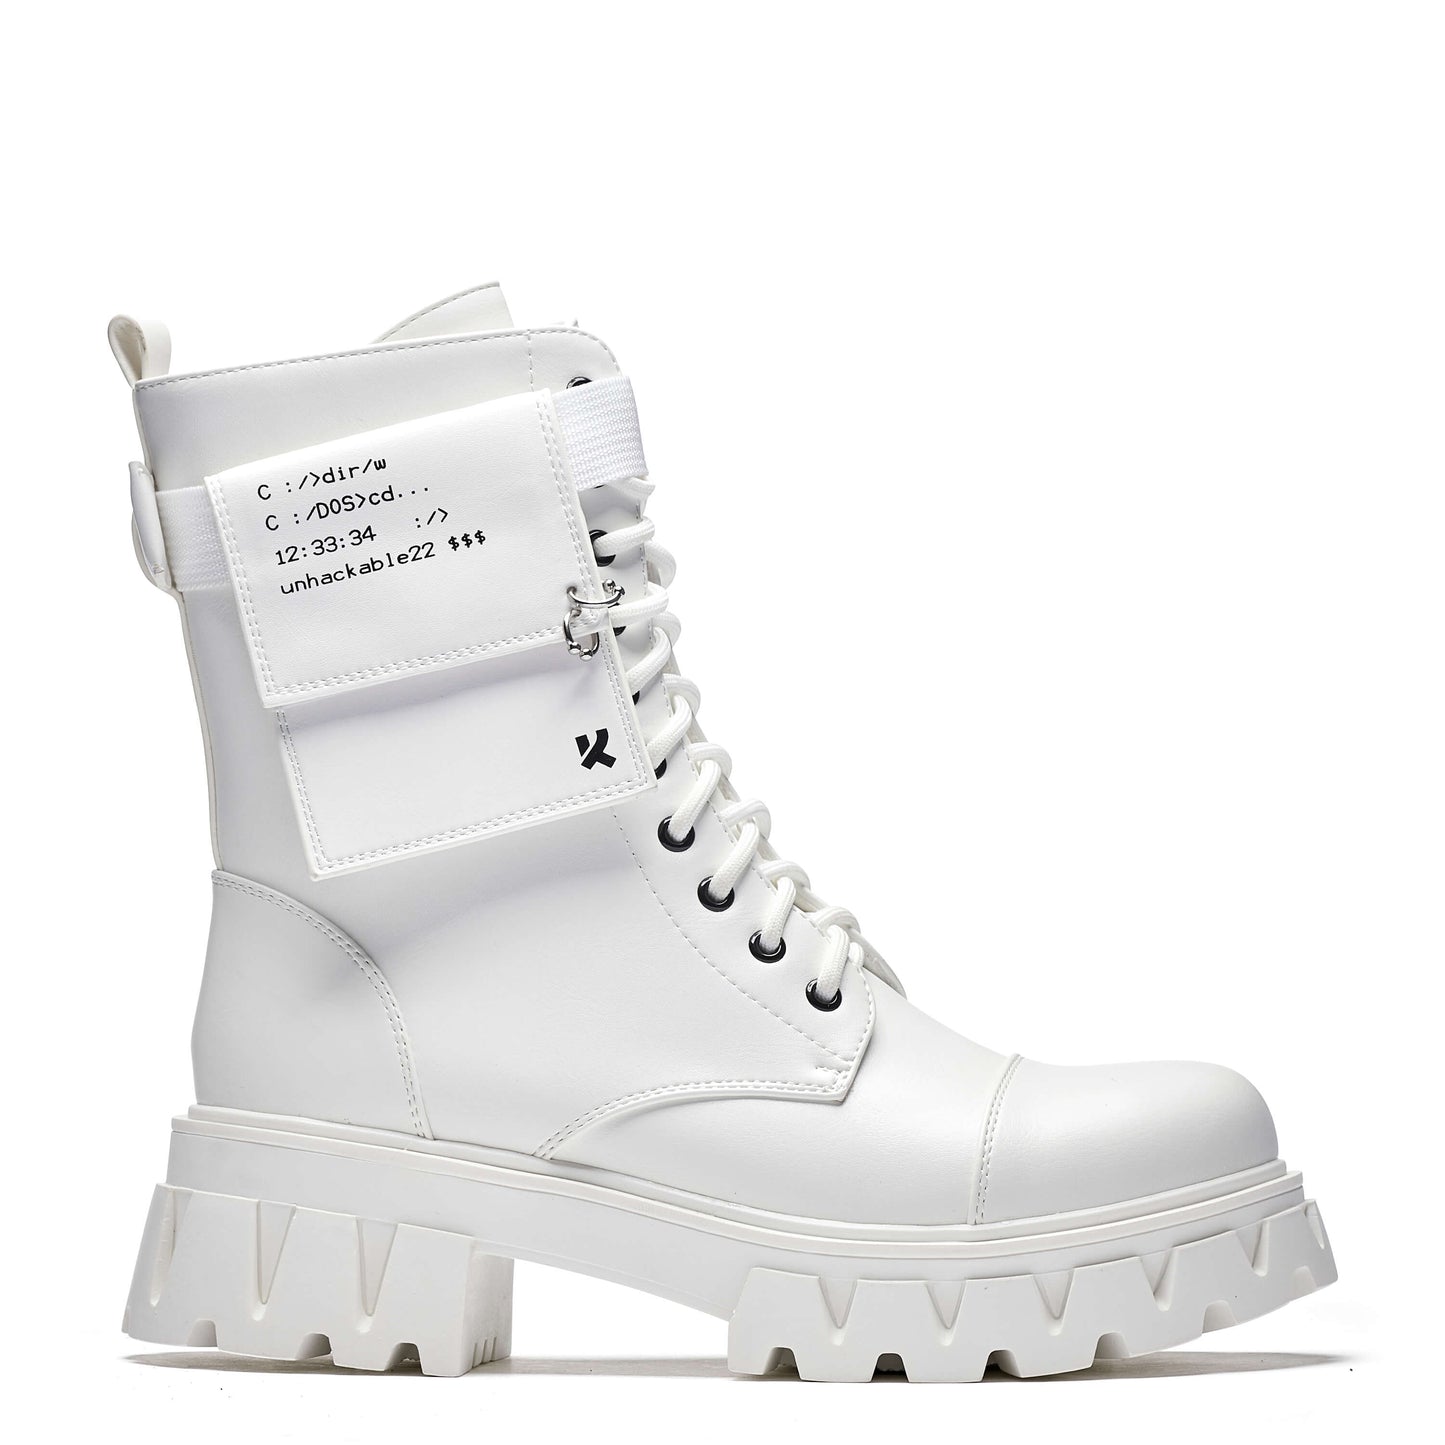 Banshee White Boots - Ankle Boots - KOI Footwear - White - Side View